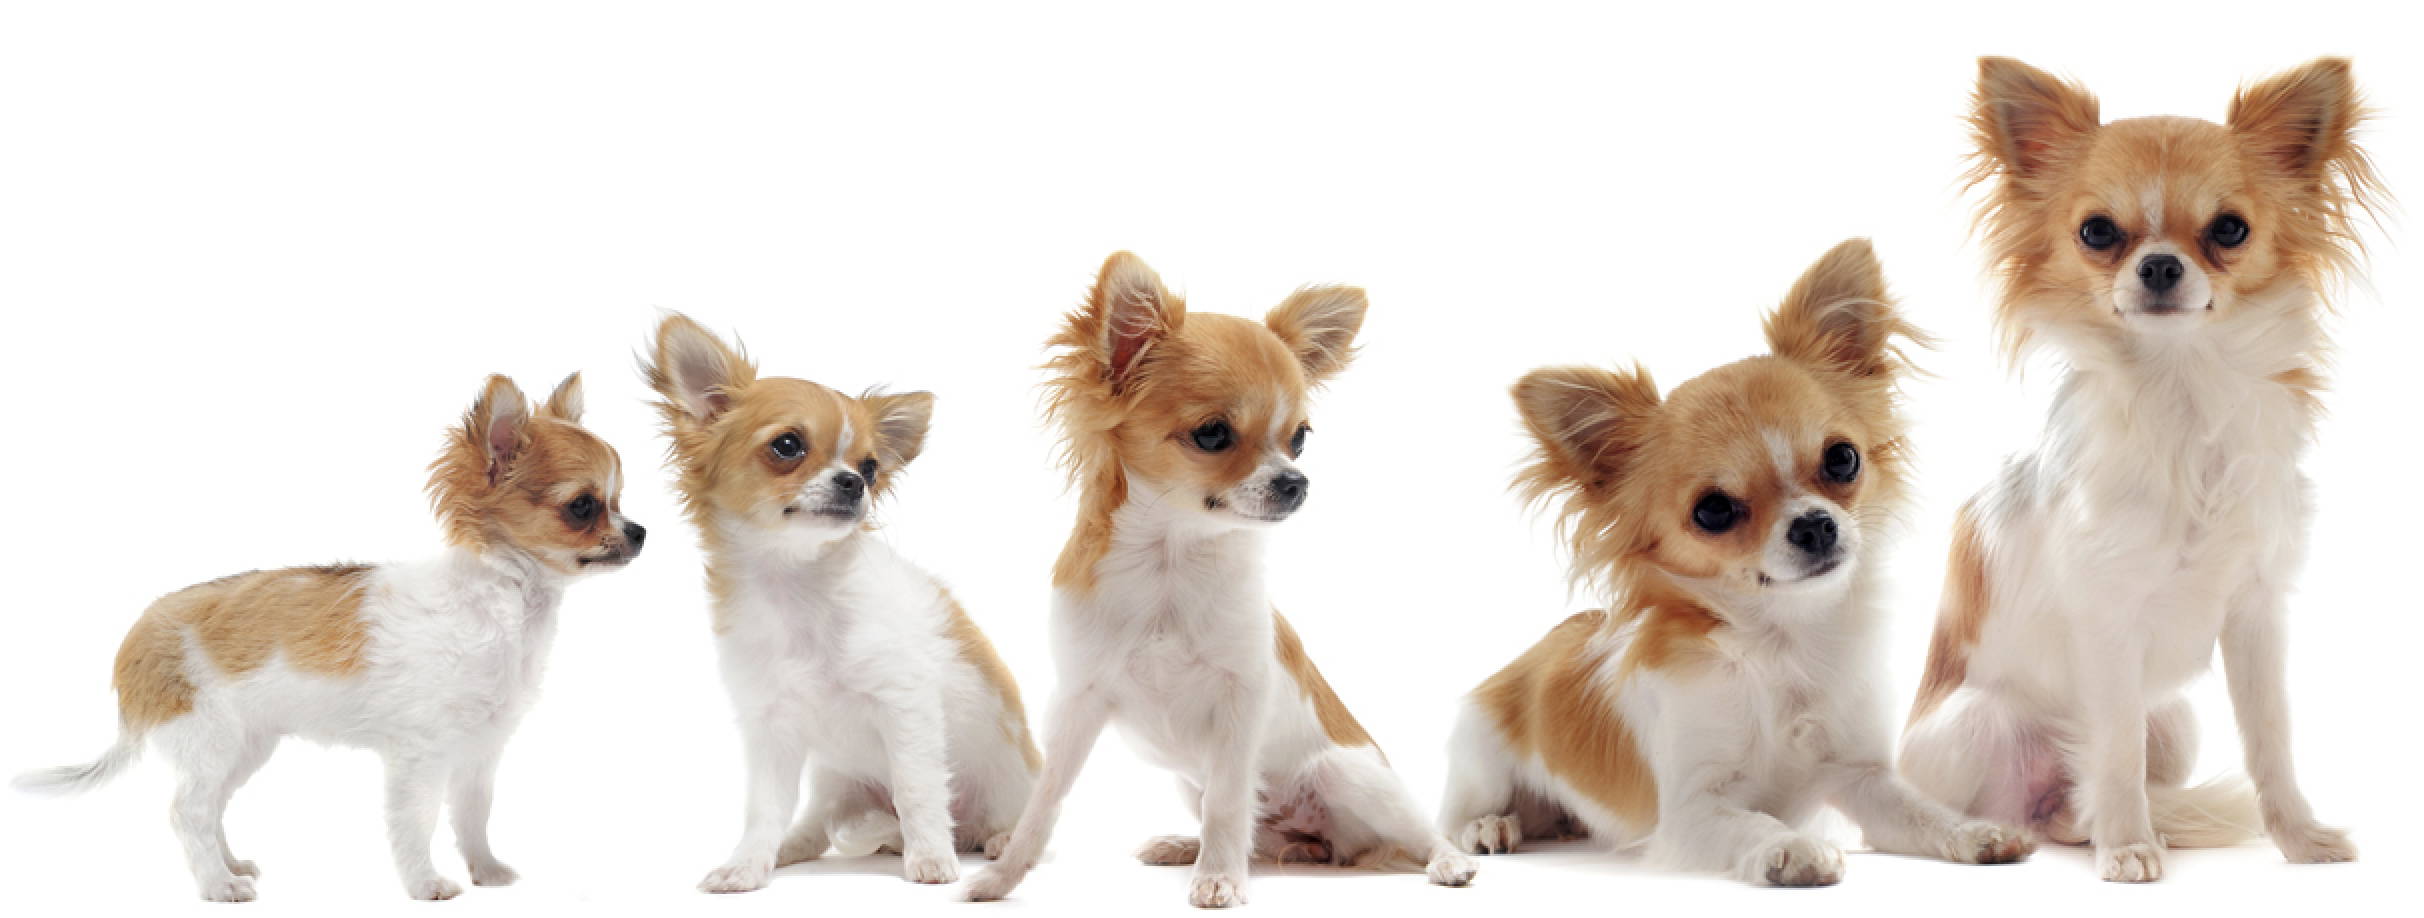 how old are chihuahuas when they stop growing